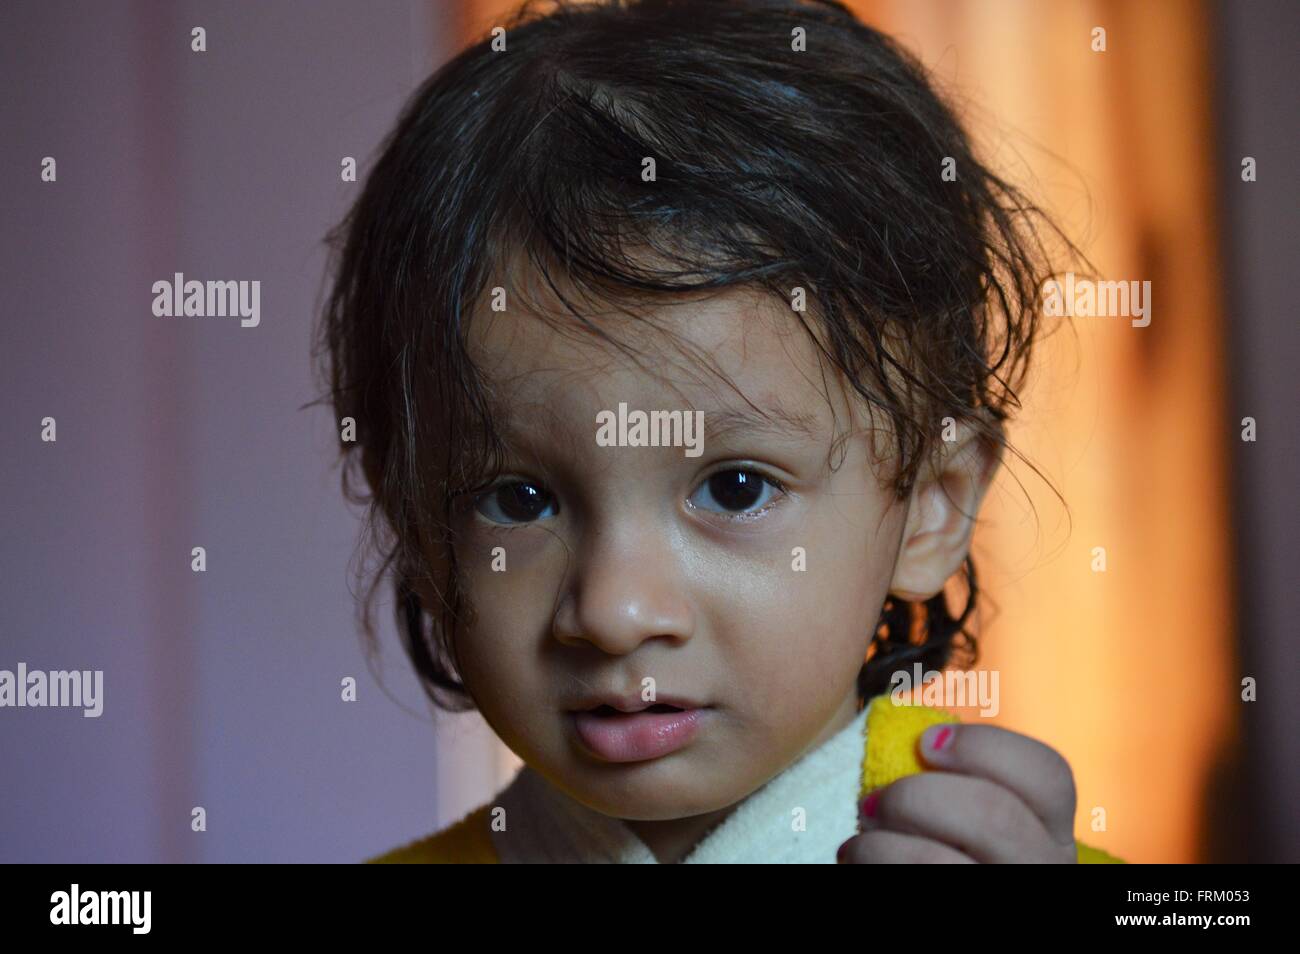 A two year old Indian kid in New Delhi, India Stock Photo